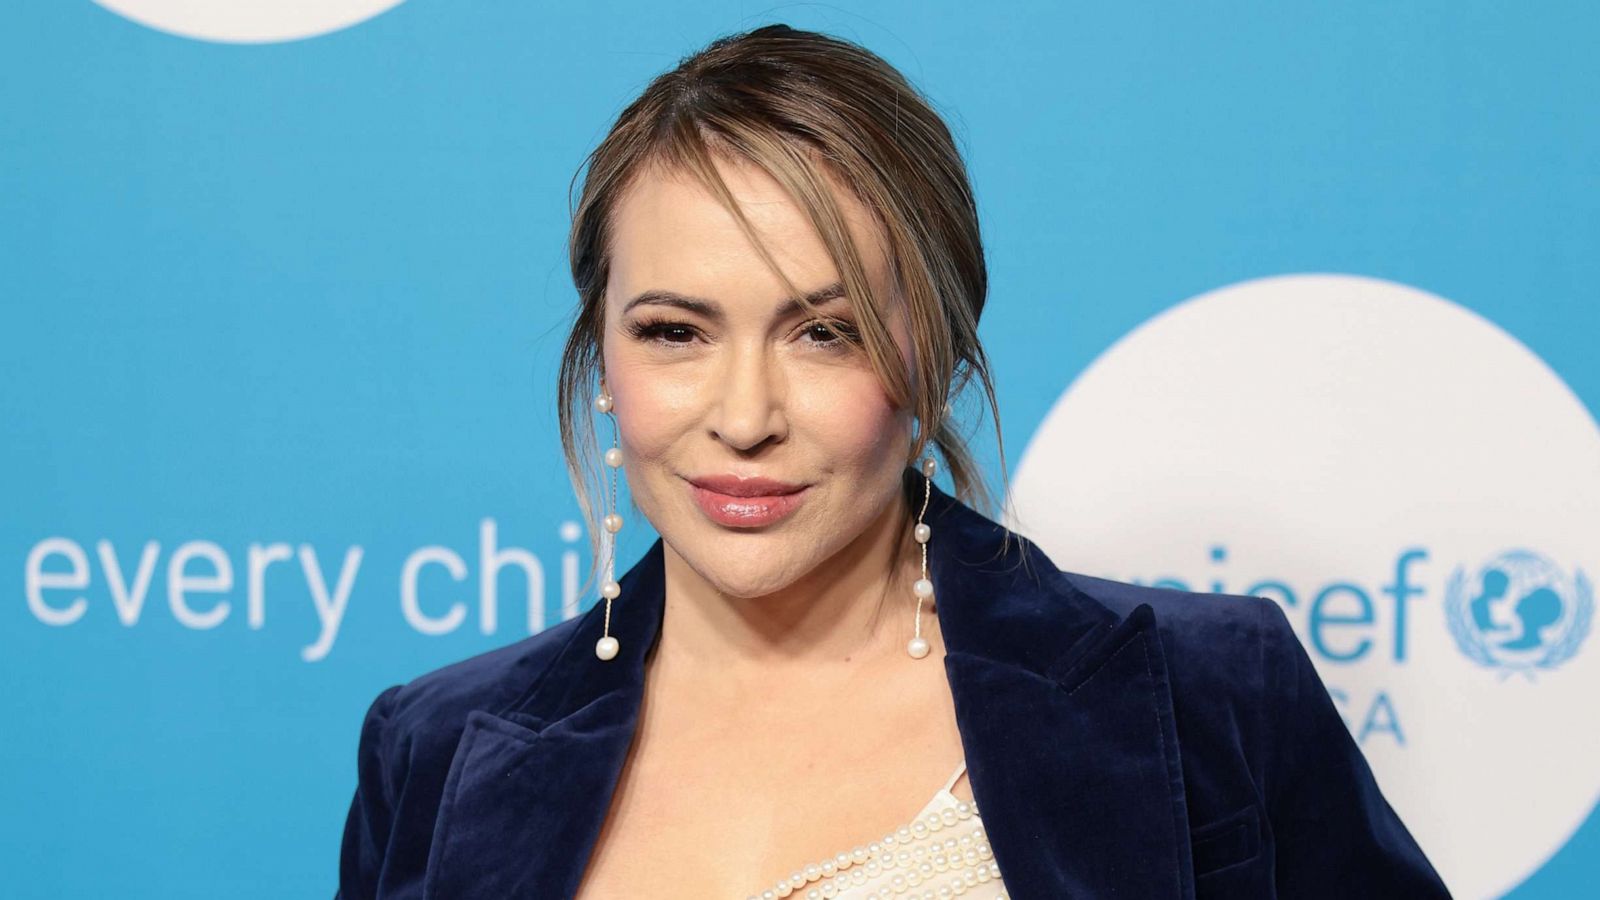 Alyssa milano encourages others to learn cpr after damar hamlin treated for cardiac arrest